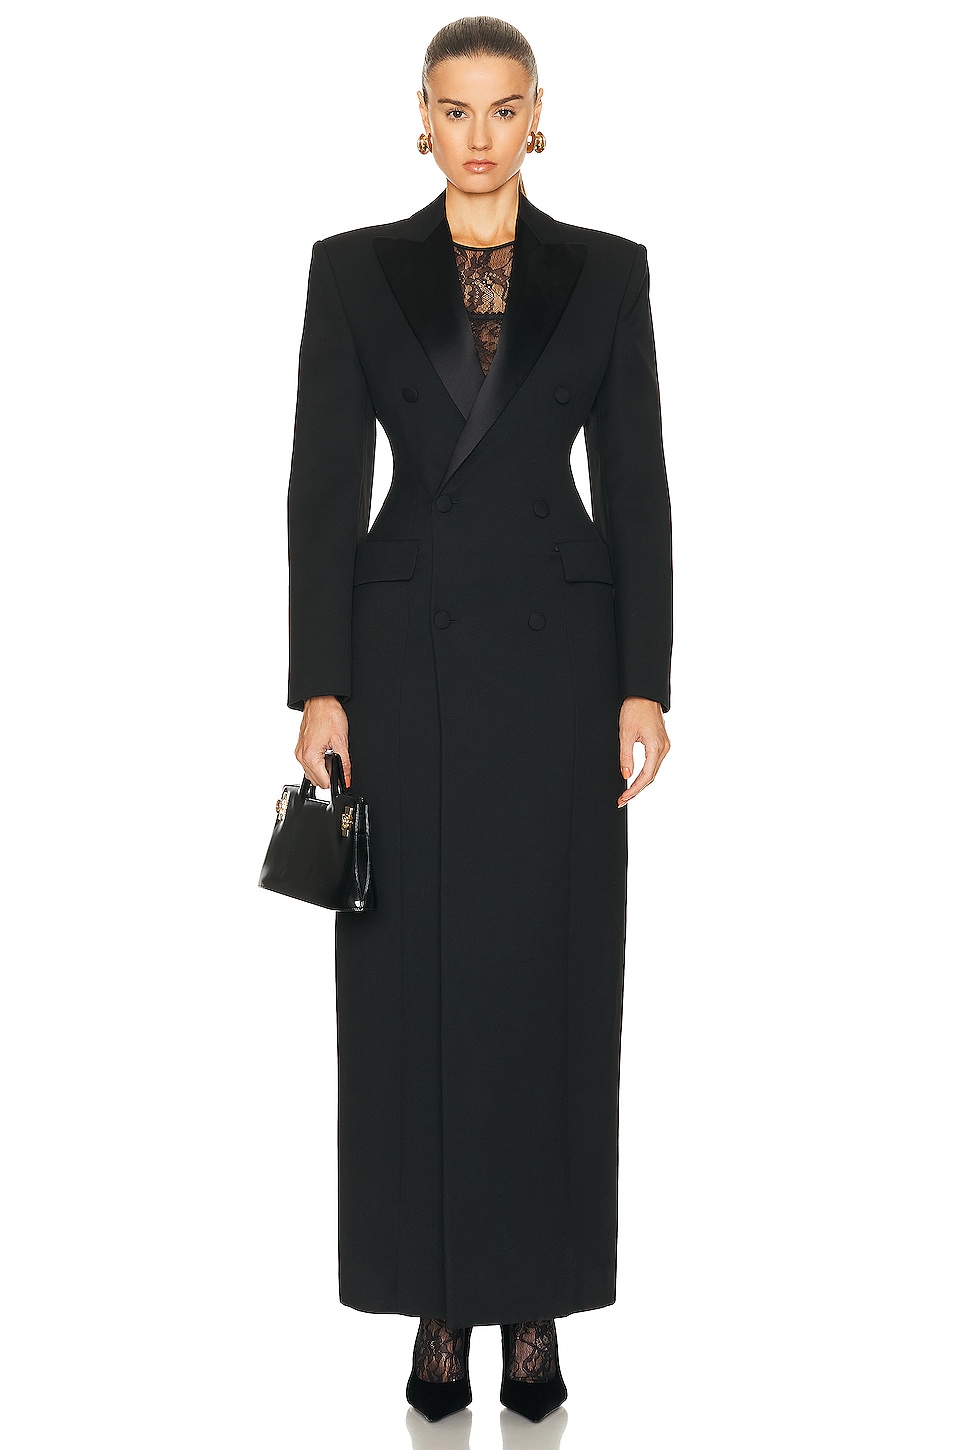 Image 1 of WARDROBE.NYC Sculpted Coat Dress in Black